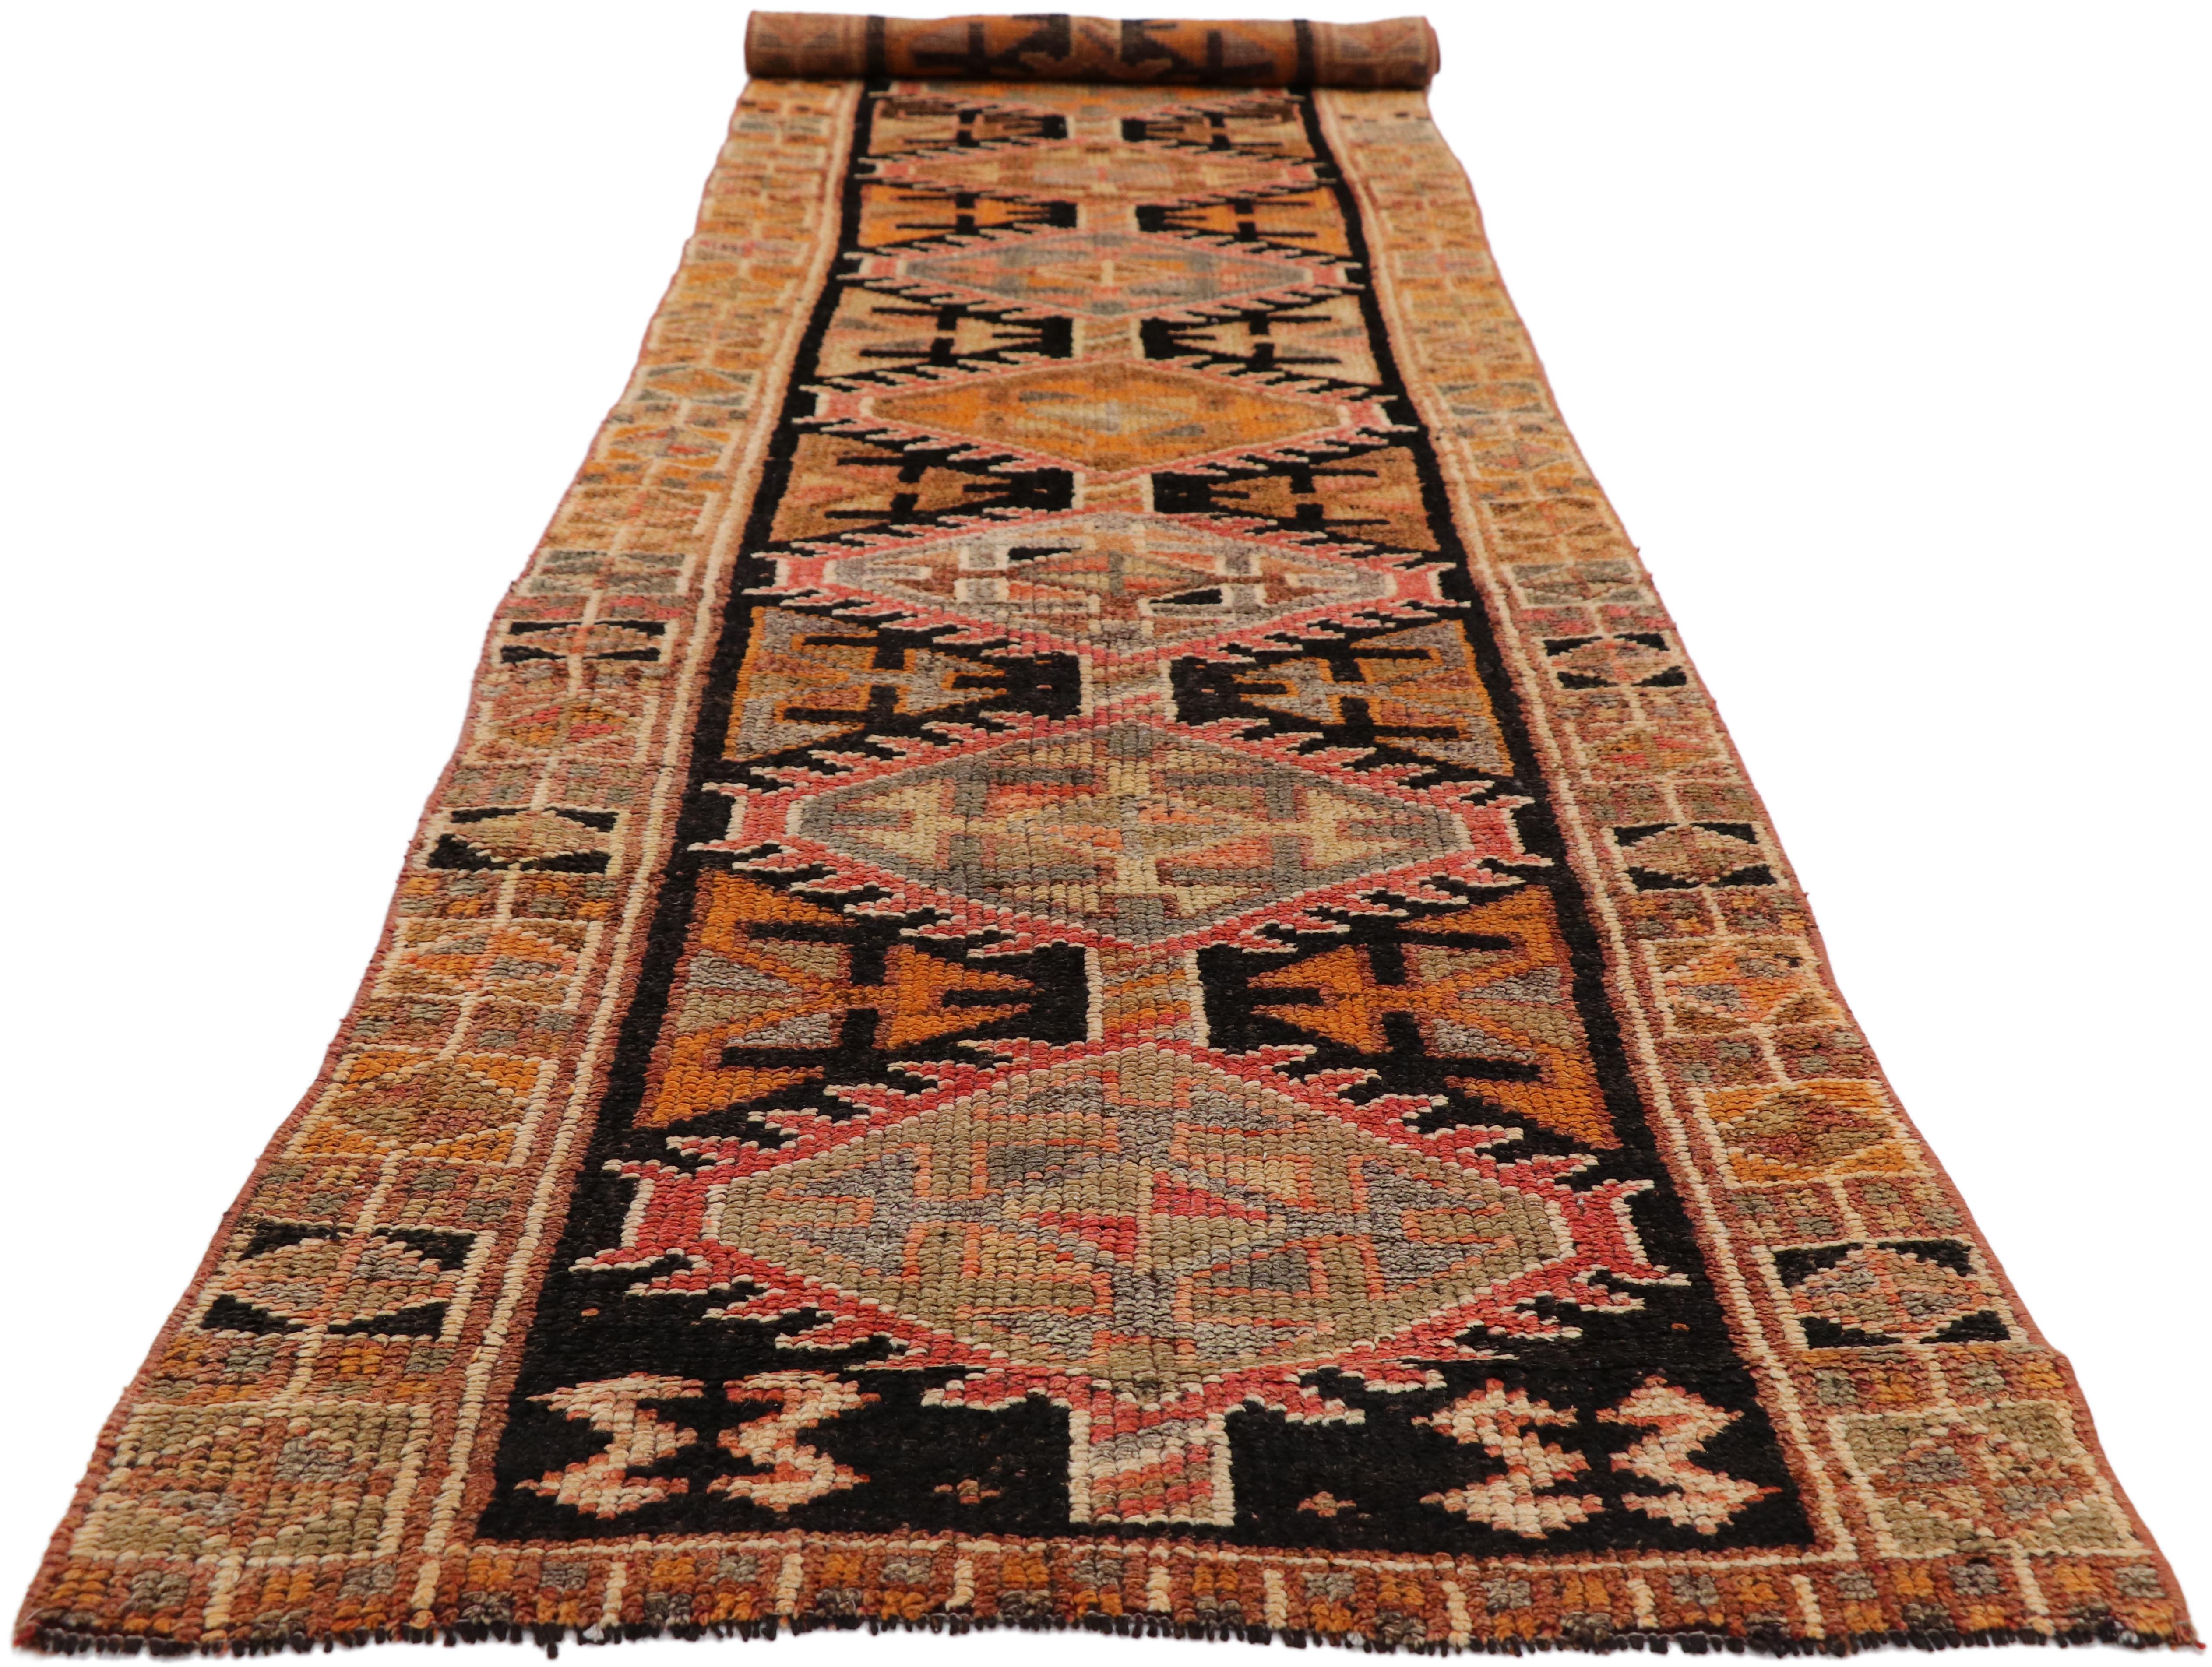 Vintage Turkish Oushak Hallway Runner with Rustic Arts & Crafts Style In Good Condition For Sale In Dallas, TX